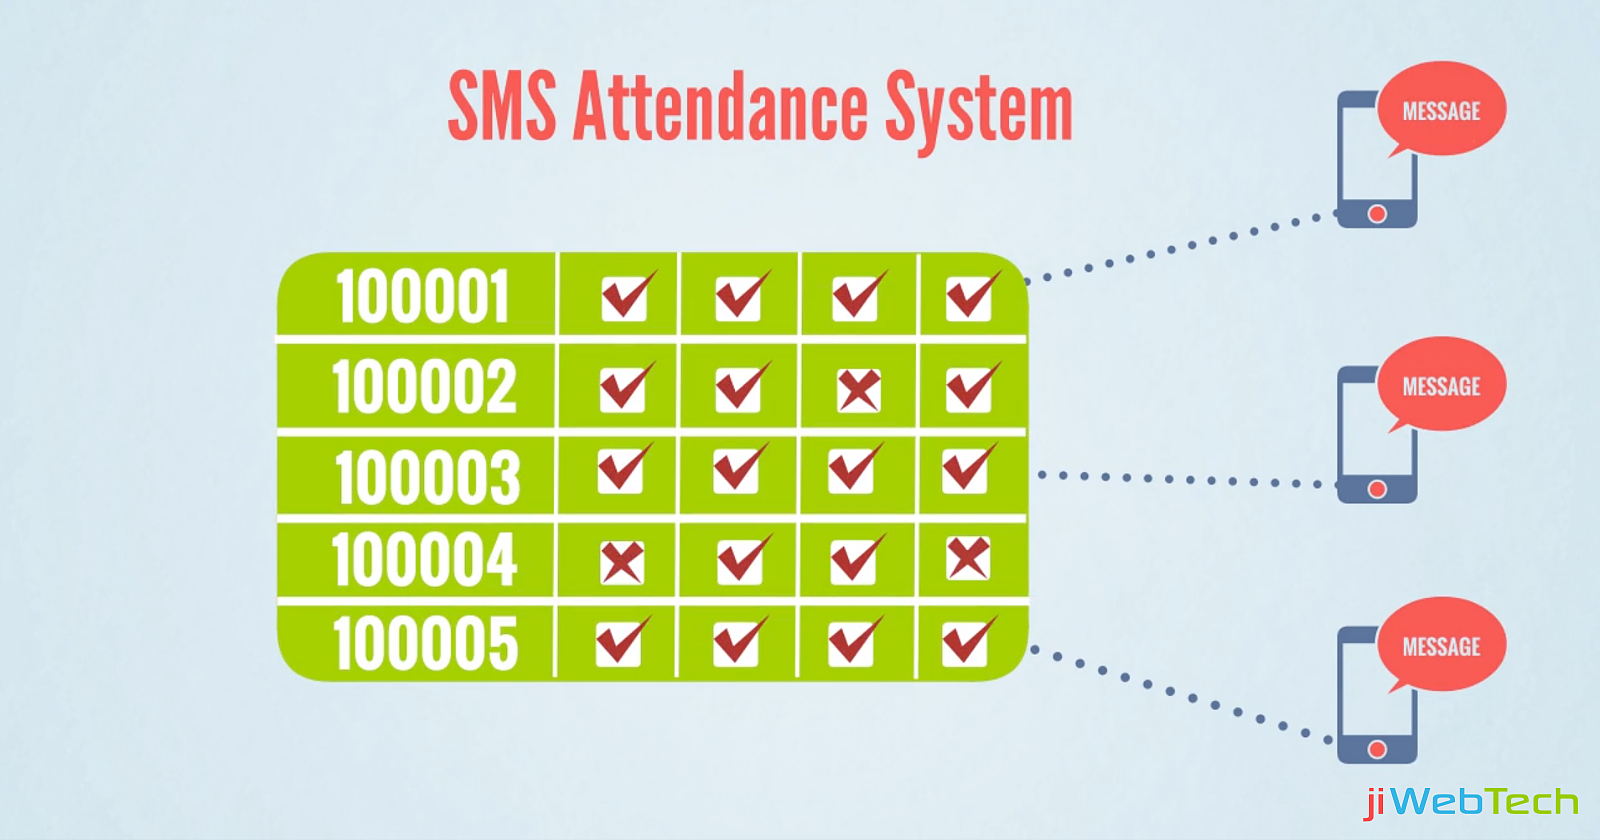 Implementing School SMS Attendance System